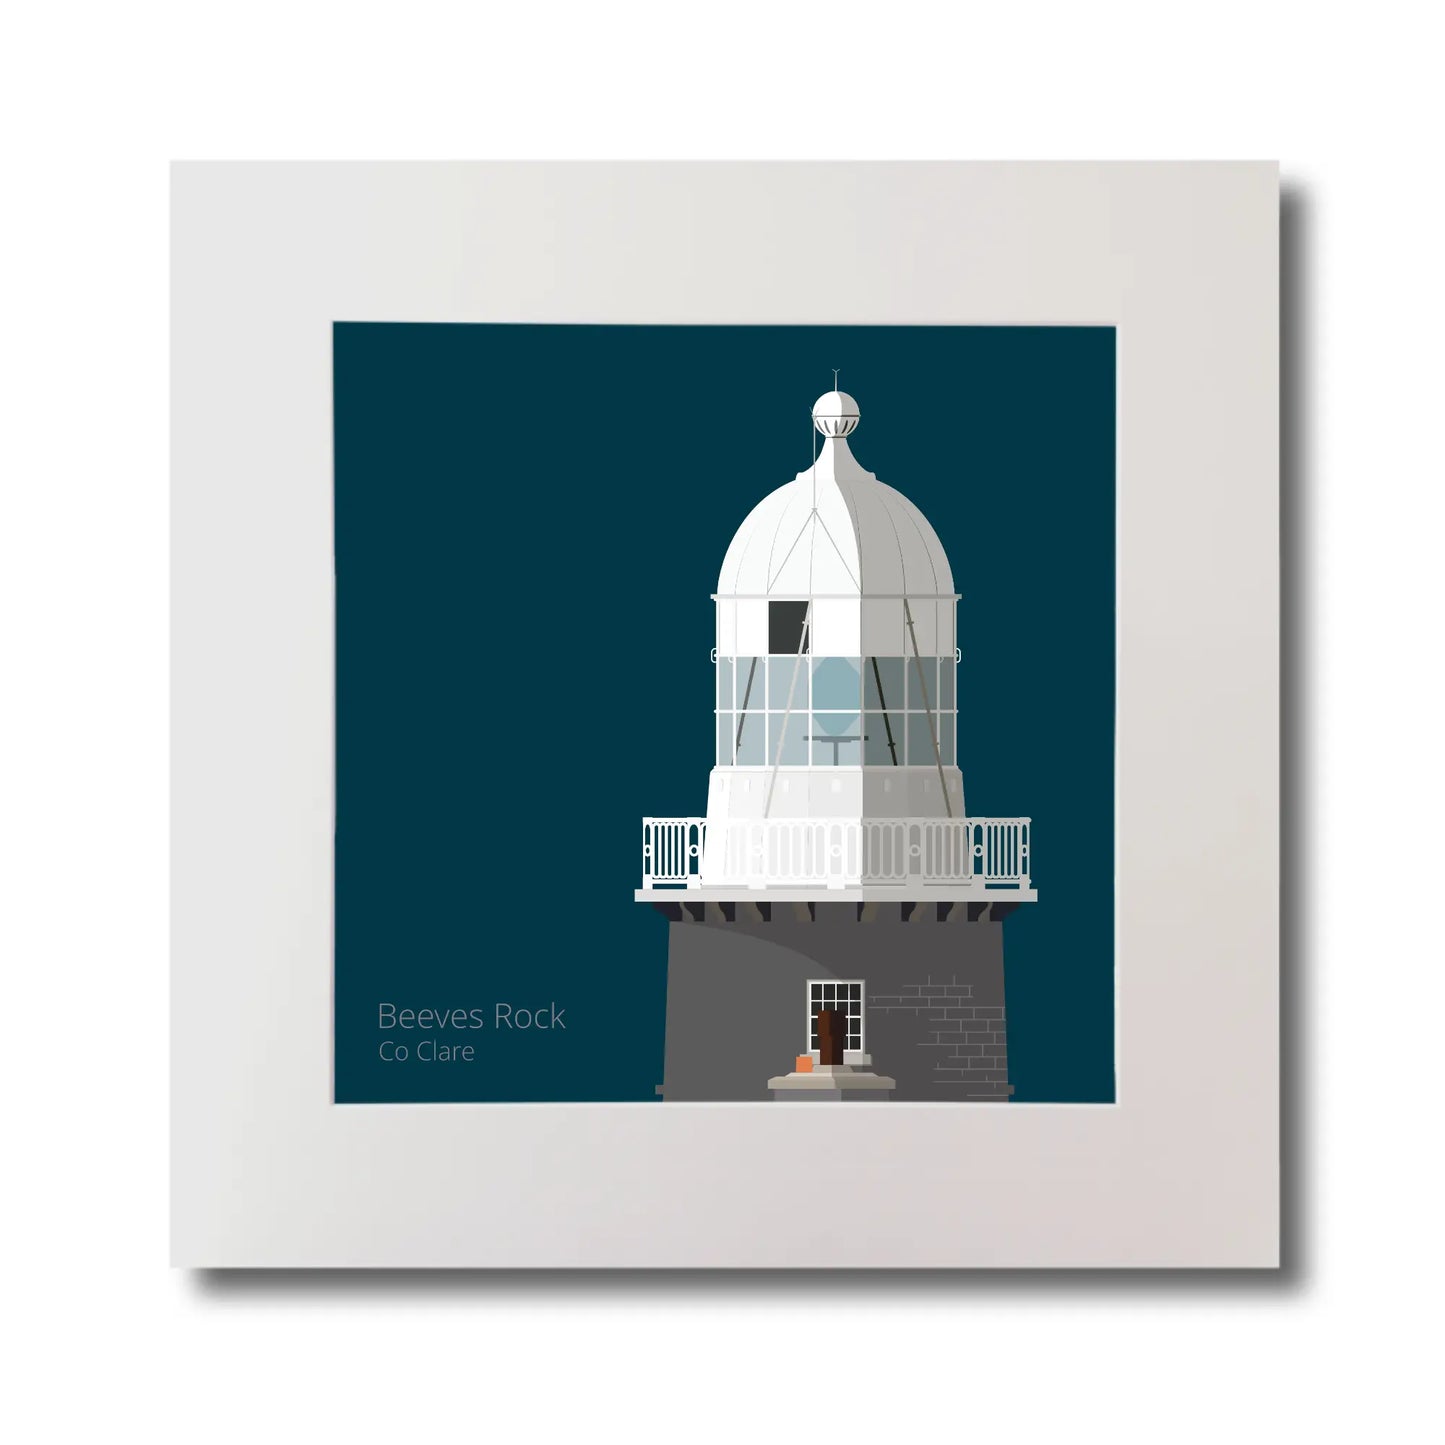 Illustration of Beeves Rock lighthouse on a midnight blue background, mounted and measuring 30x30cm.